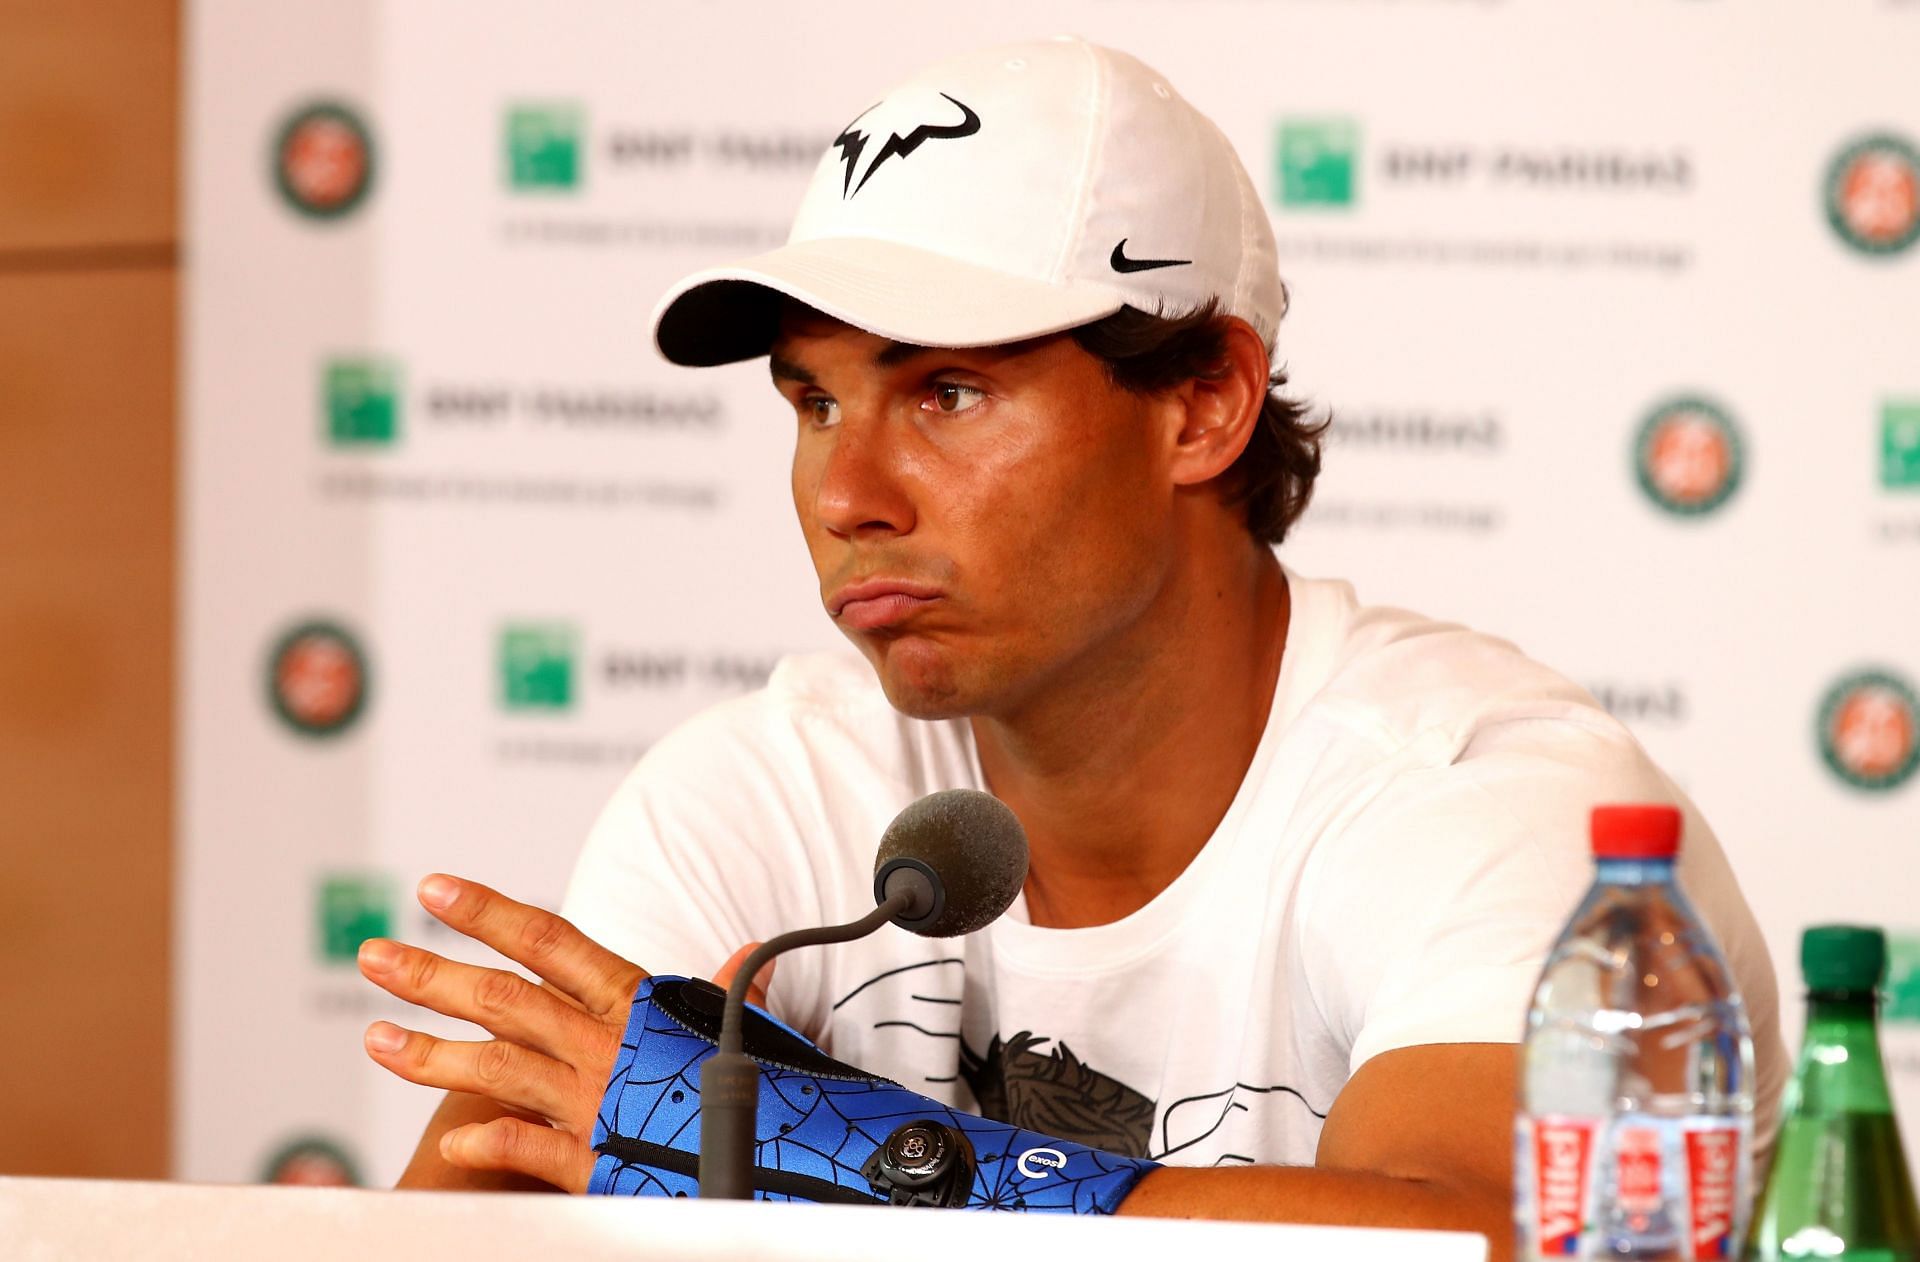 Rafael Nadal also commented on the Wimbledon situation during the press conference